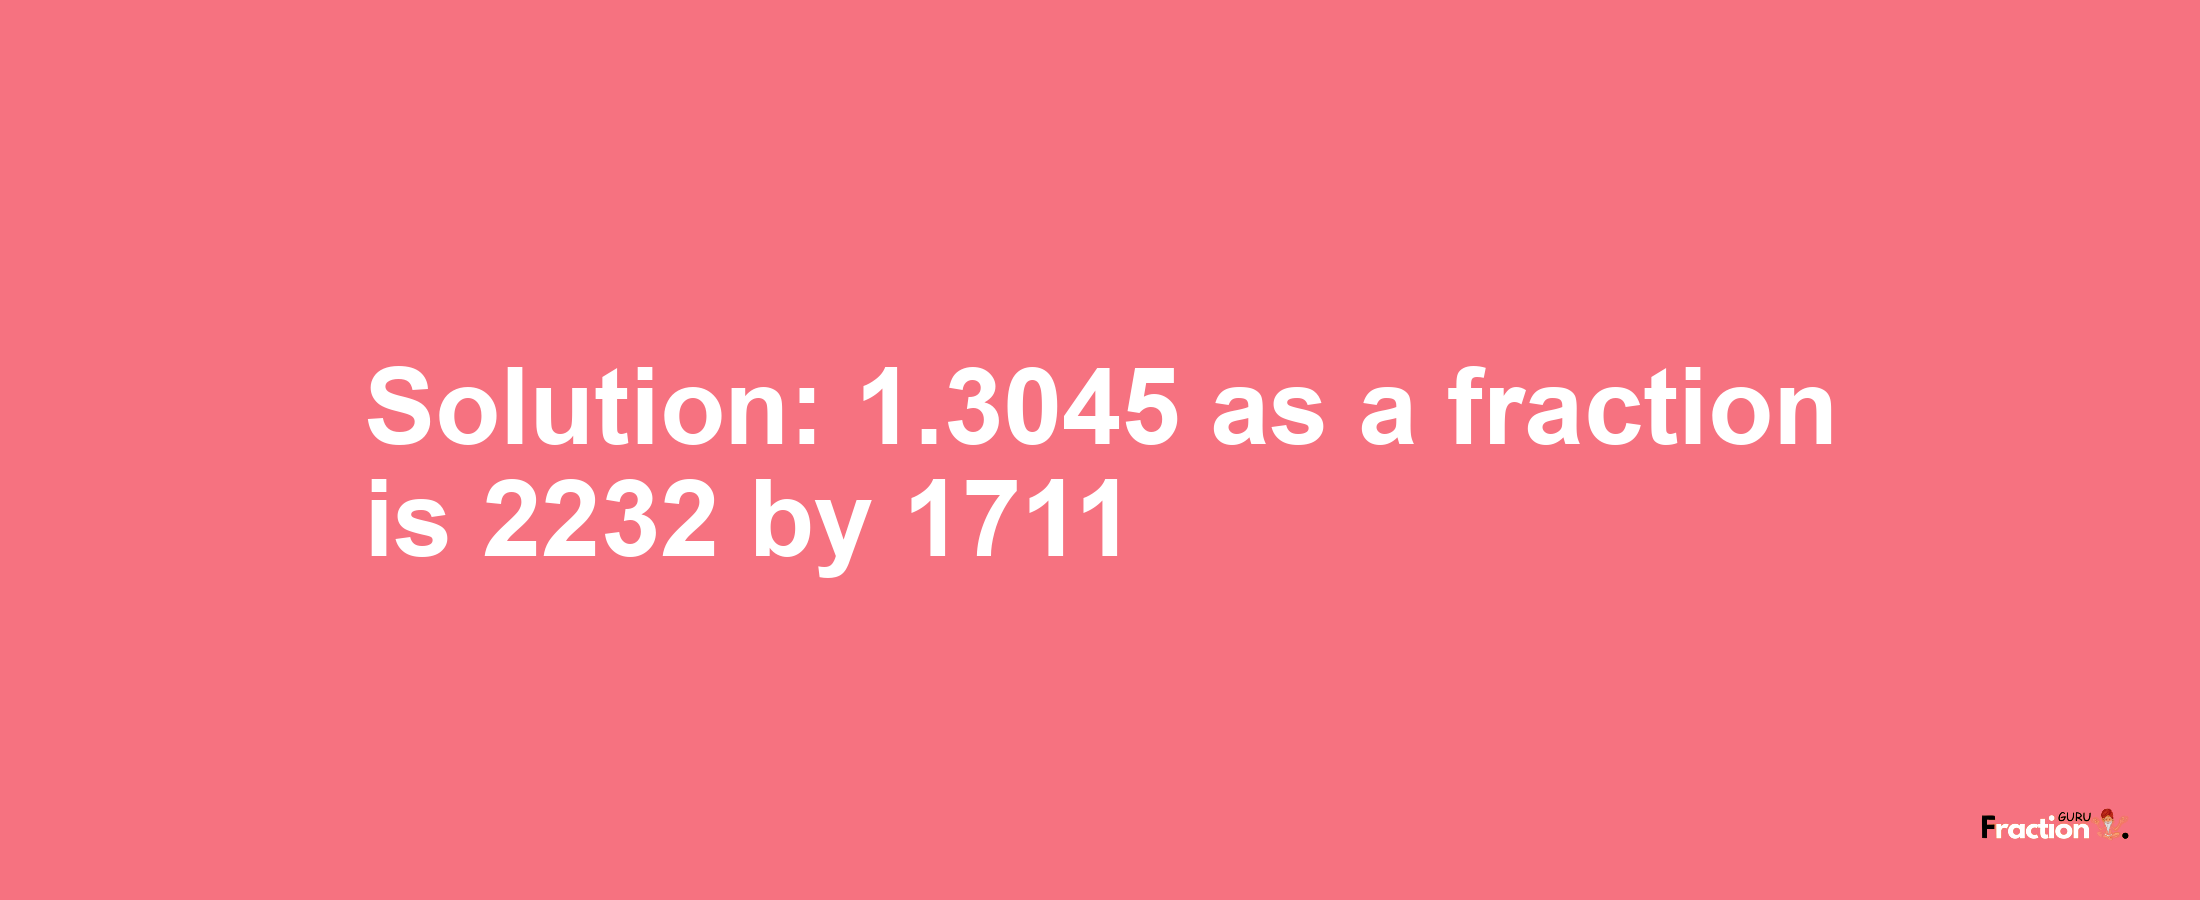 Solution:1.3045 as a fraction is 2232/1711